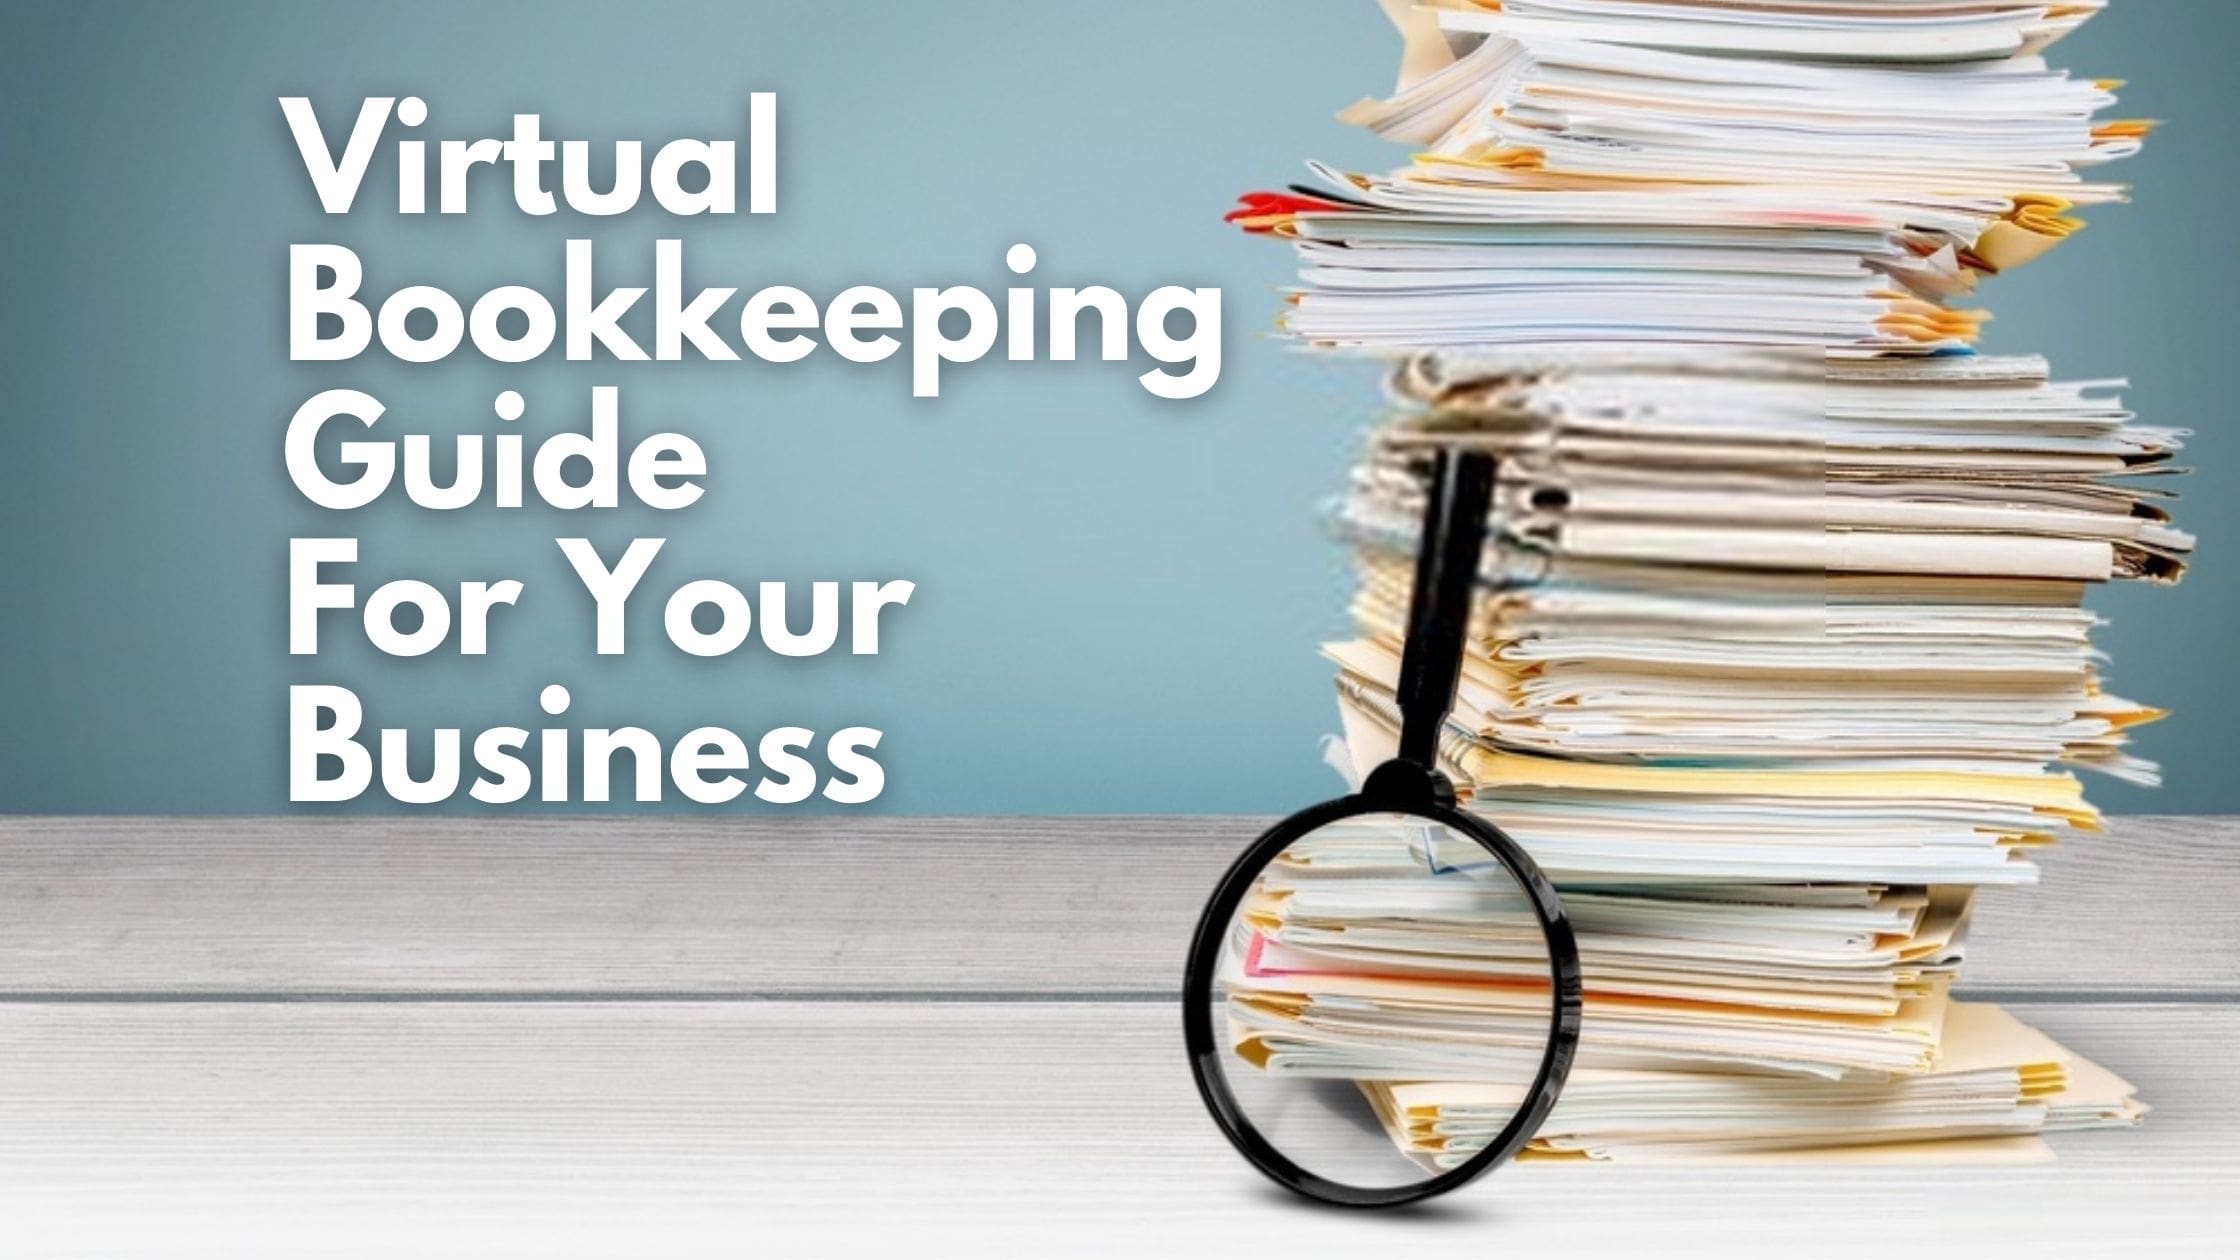 Virtual Bookkeeping Guide For Your Business